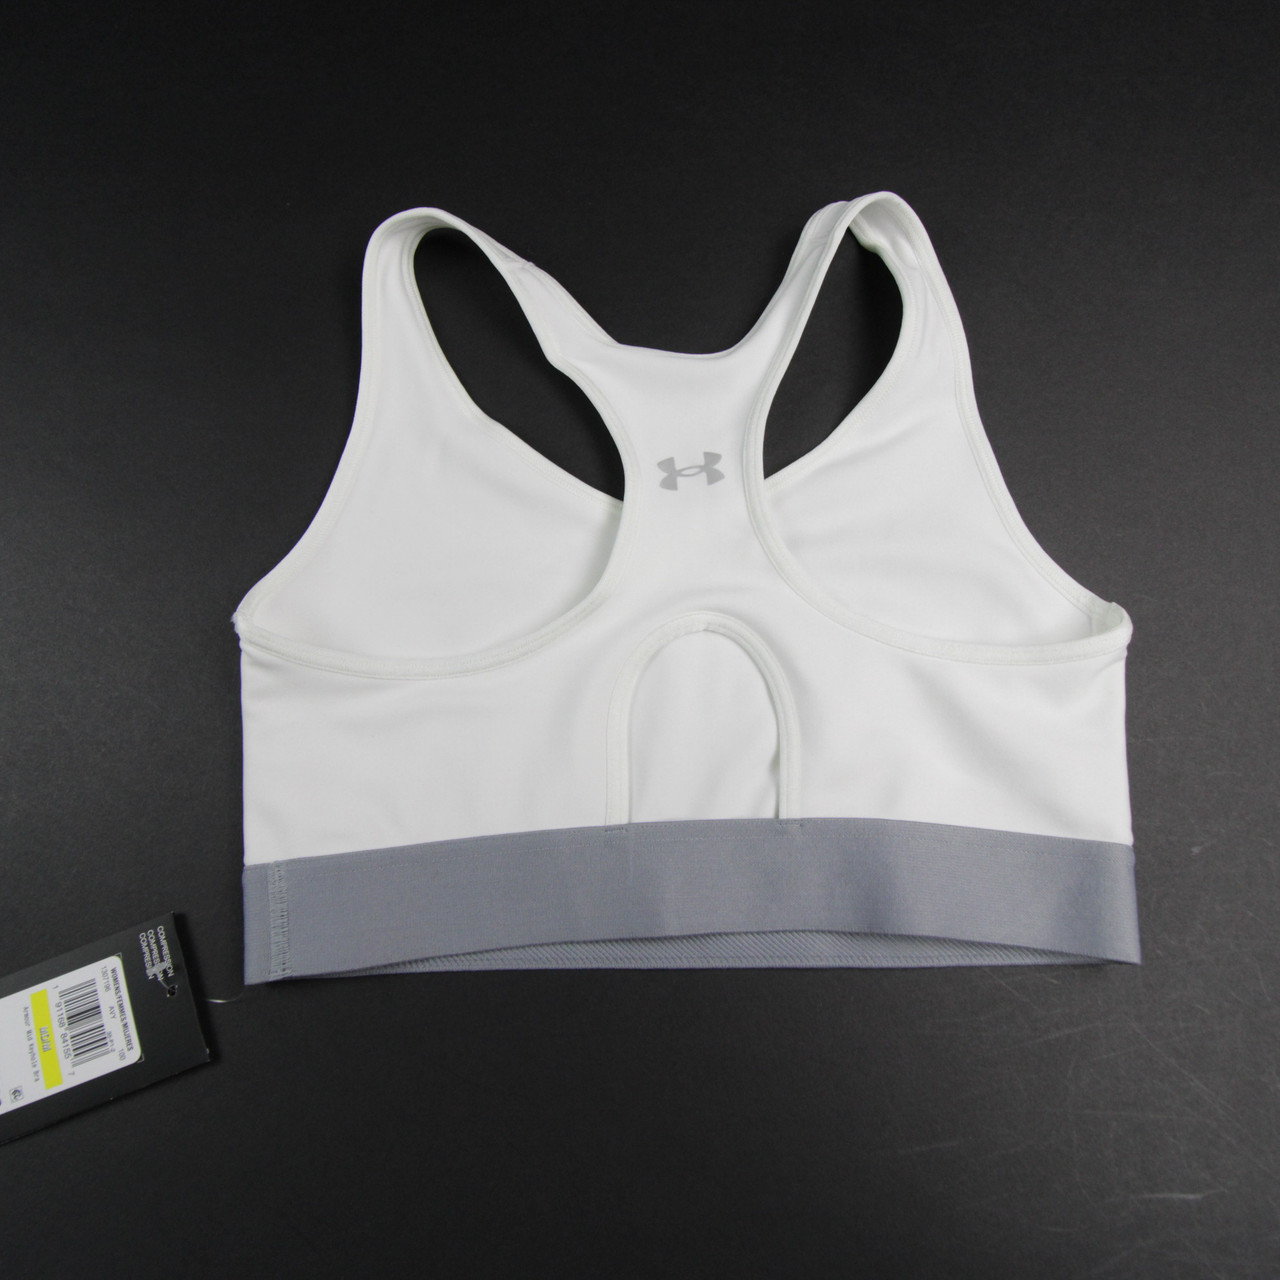 Under Armour Sports Bra Women's White New with Tags M 650 - Locker